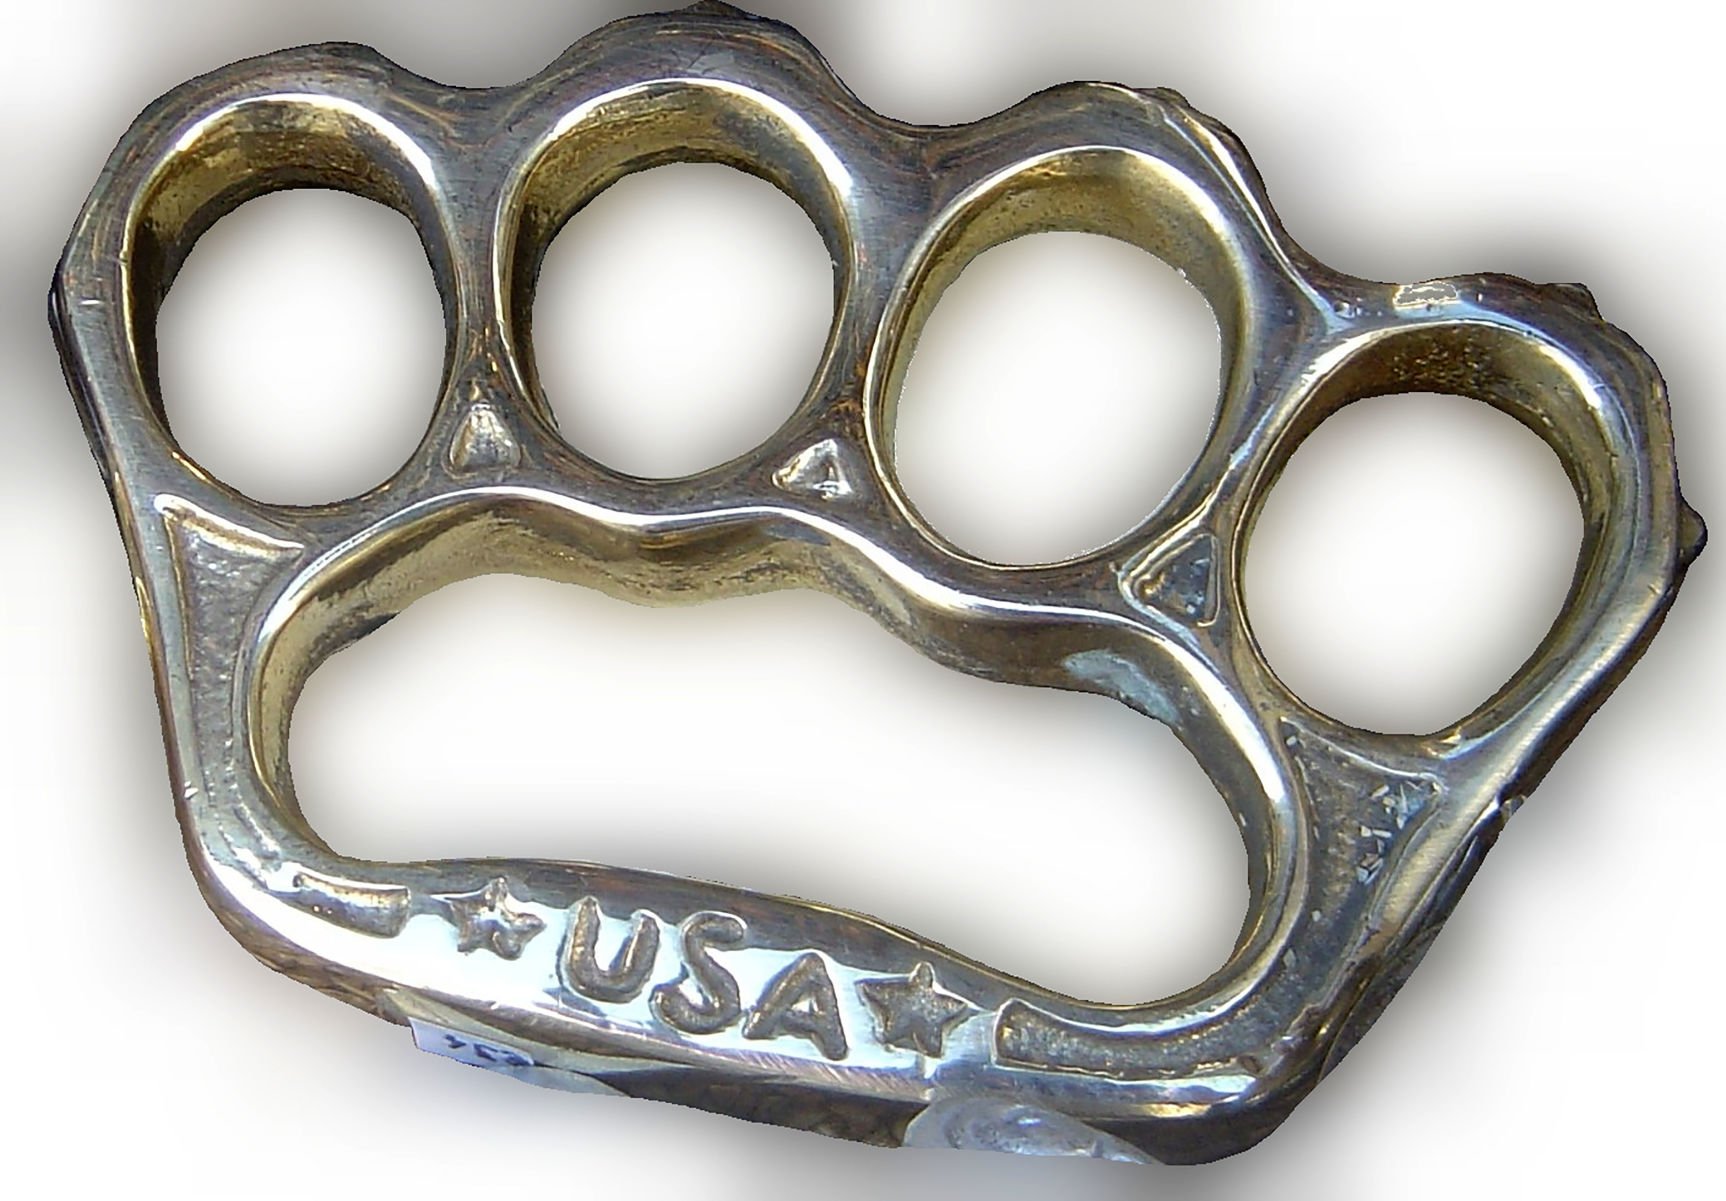 Why are brass knuckles illegal in some states but knives aren't